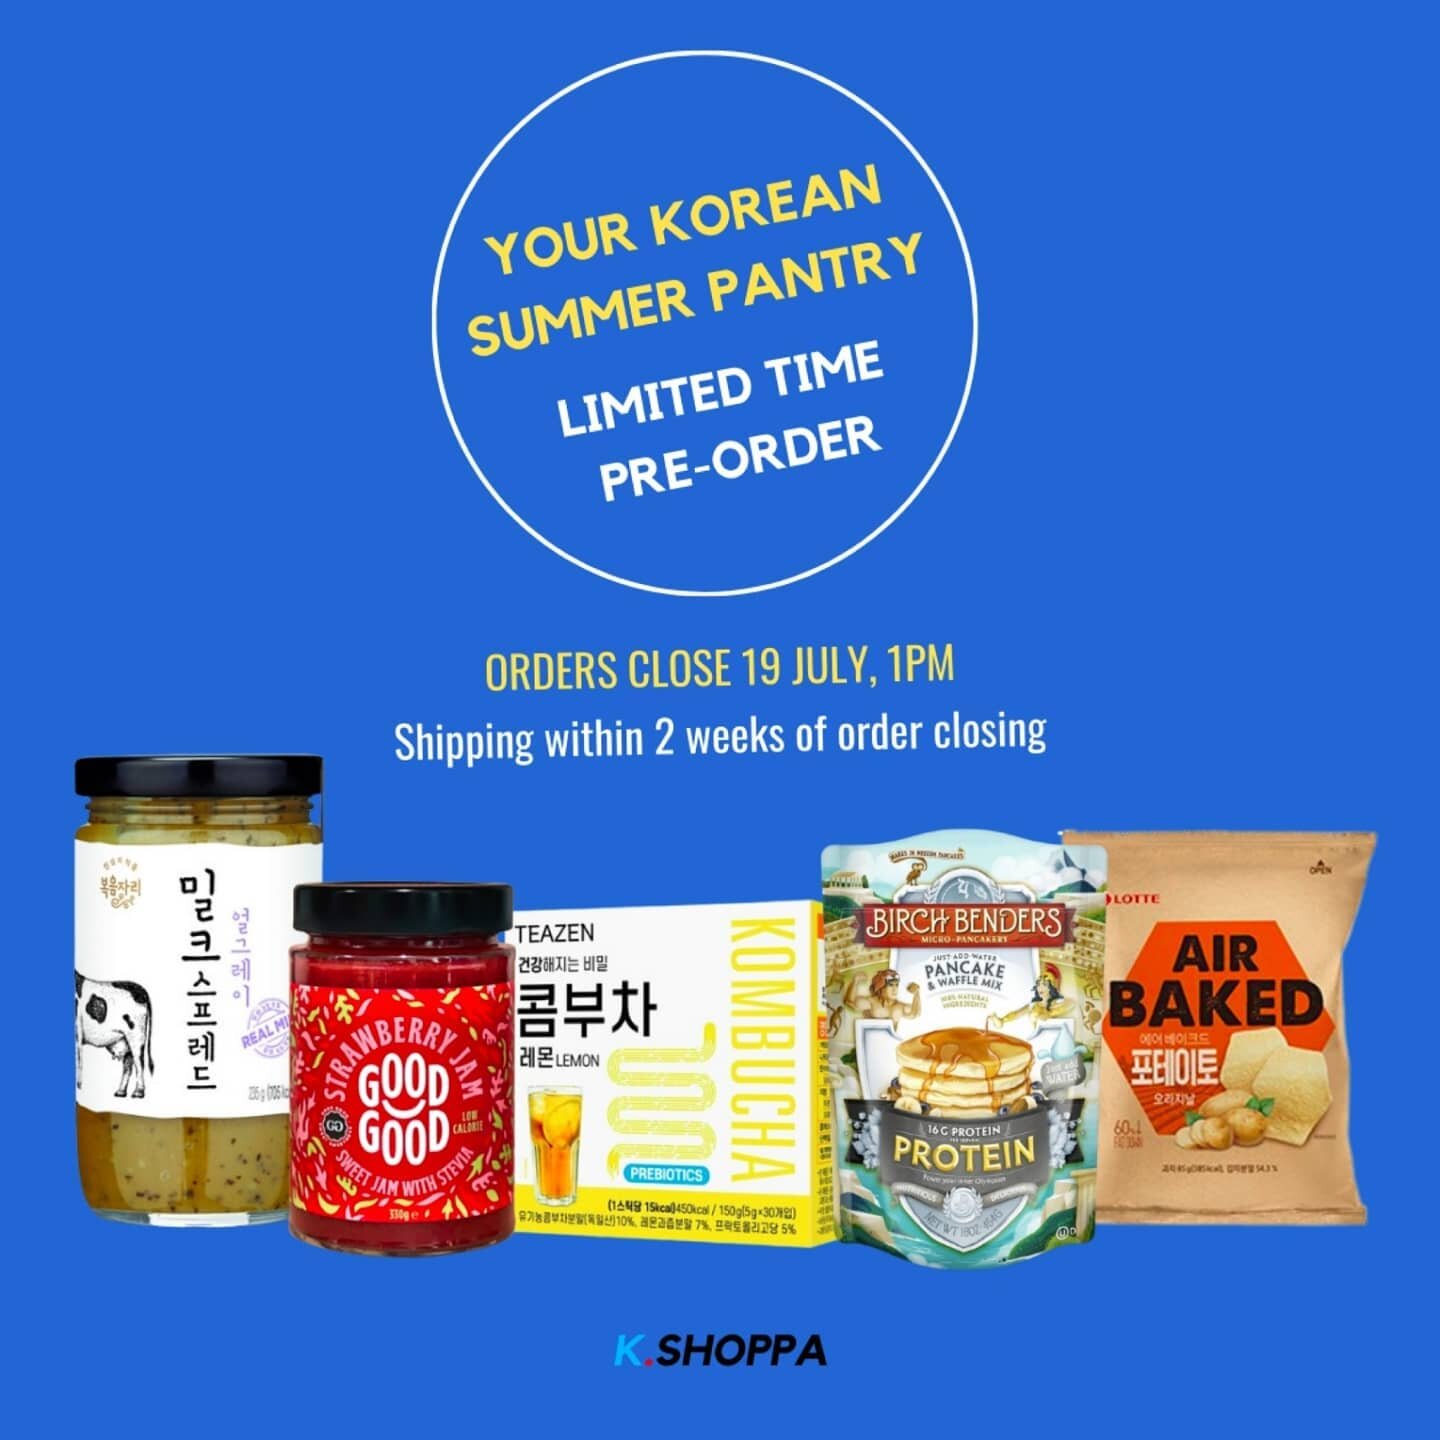 One of the projects that my team has been working tirelessly on, happy to finally unveil @kshoppa_sg - your one stop shopping destination for all things Korean! 

Do give the page your support by following it, and feel free to pre-order + tag me in y